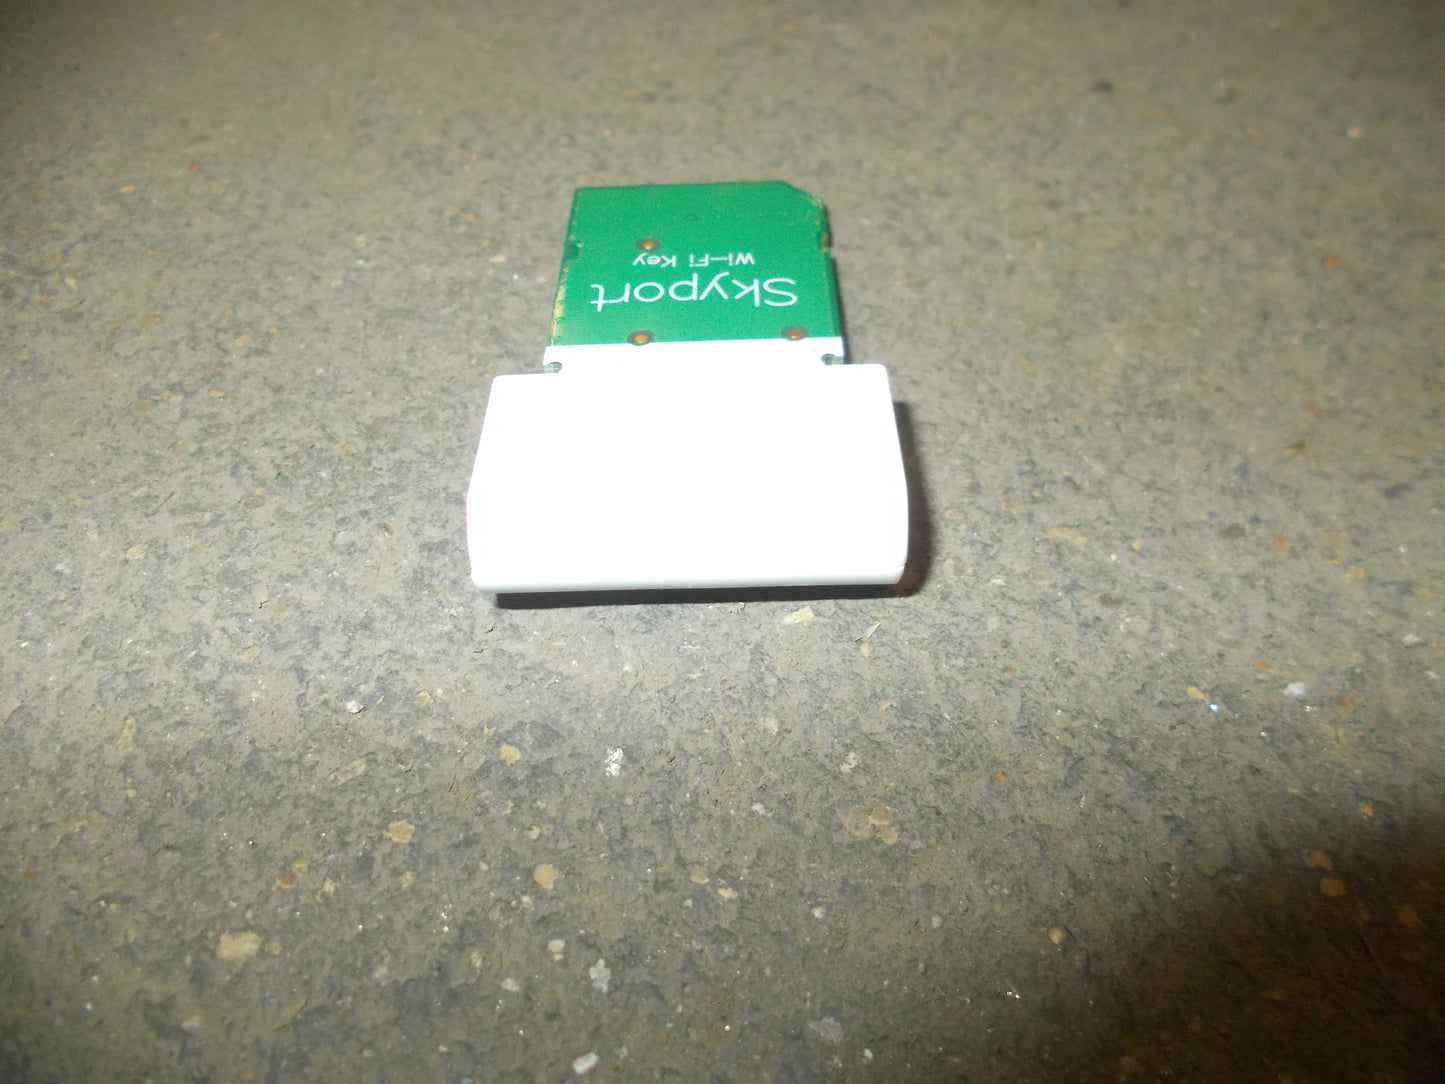 'CTS' SERIES THERMOSTAT WI-FI INTERNET ACCESS MODULE